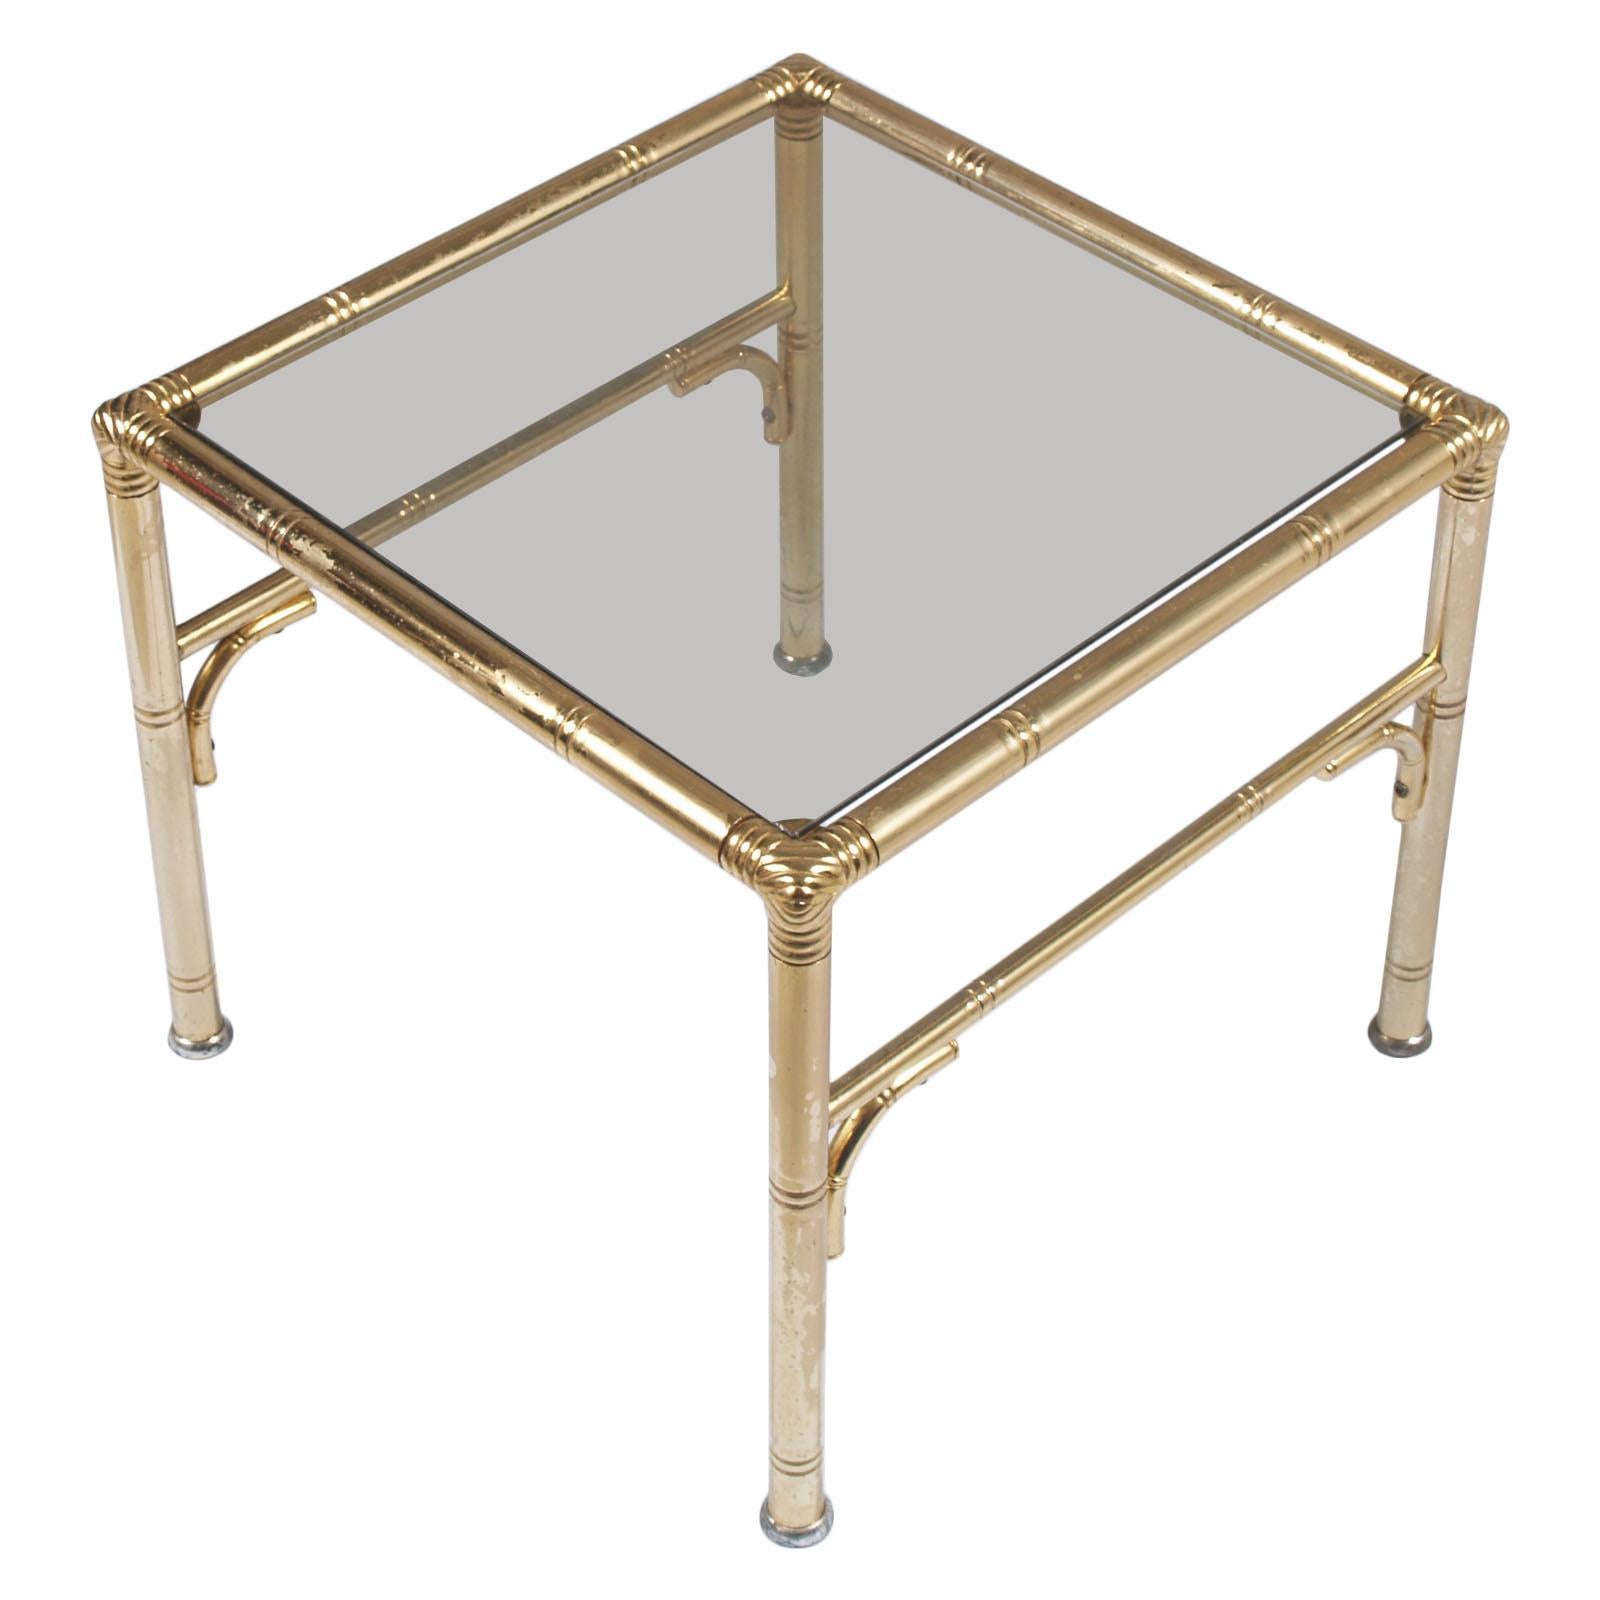 Midcentury Coffee Tables, Faux Bamboo Gilt Metal, Smoked Glass by Maison Bagues